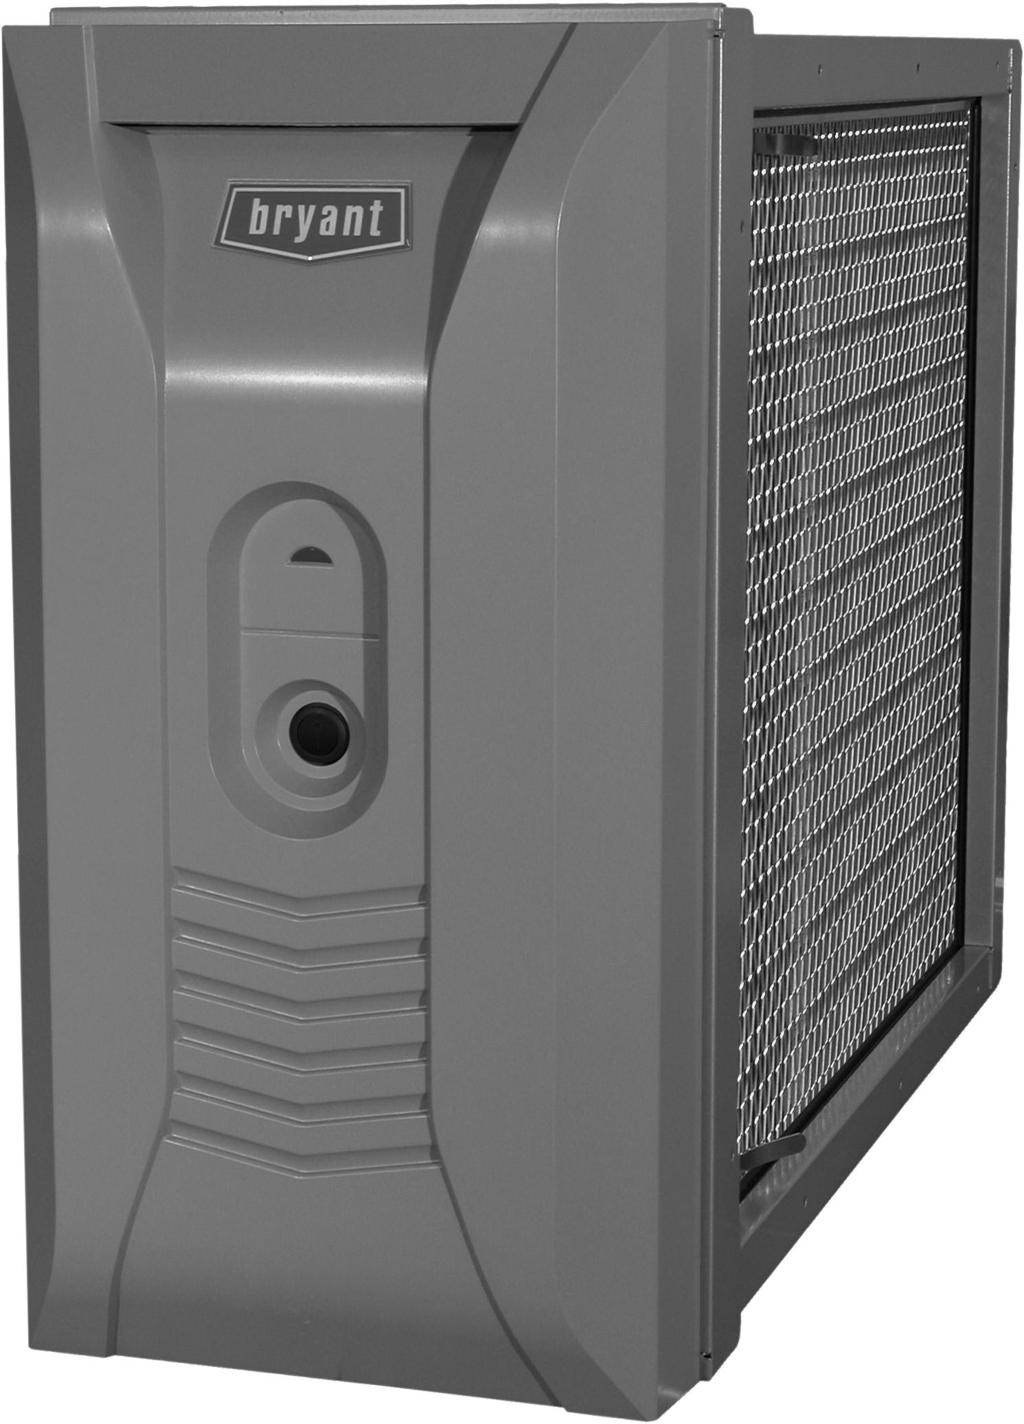 Perfect Air Purifier Offers Healthier Air for the Entire Home The Perfect Air Purifier is Bryant s premier air purification solution.